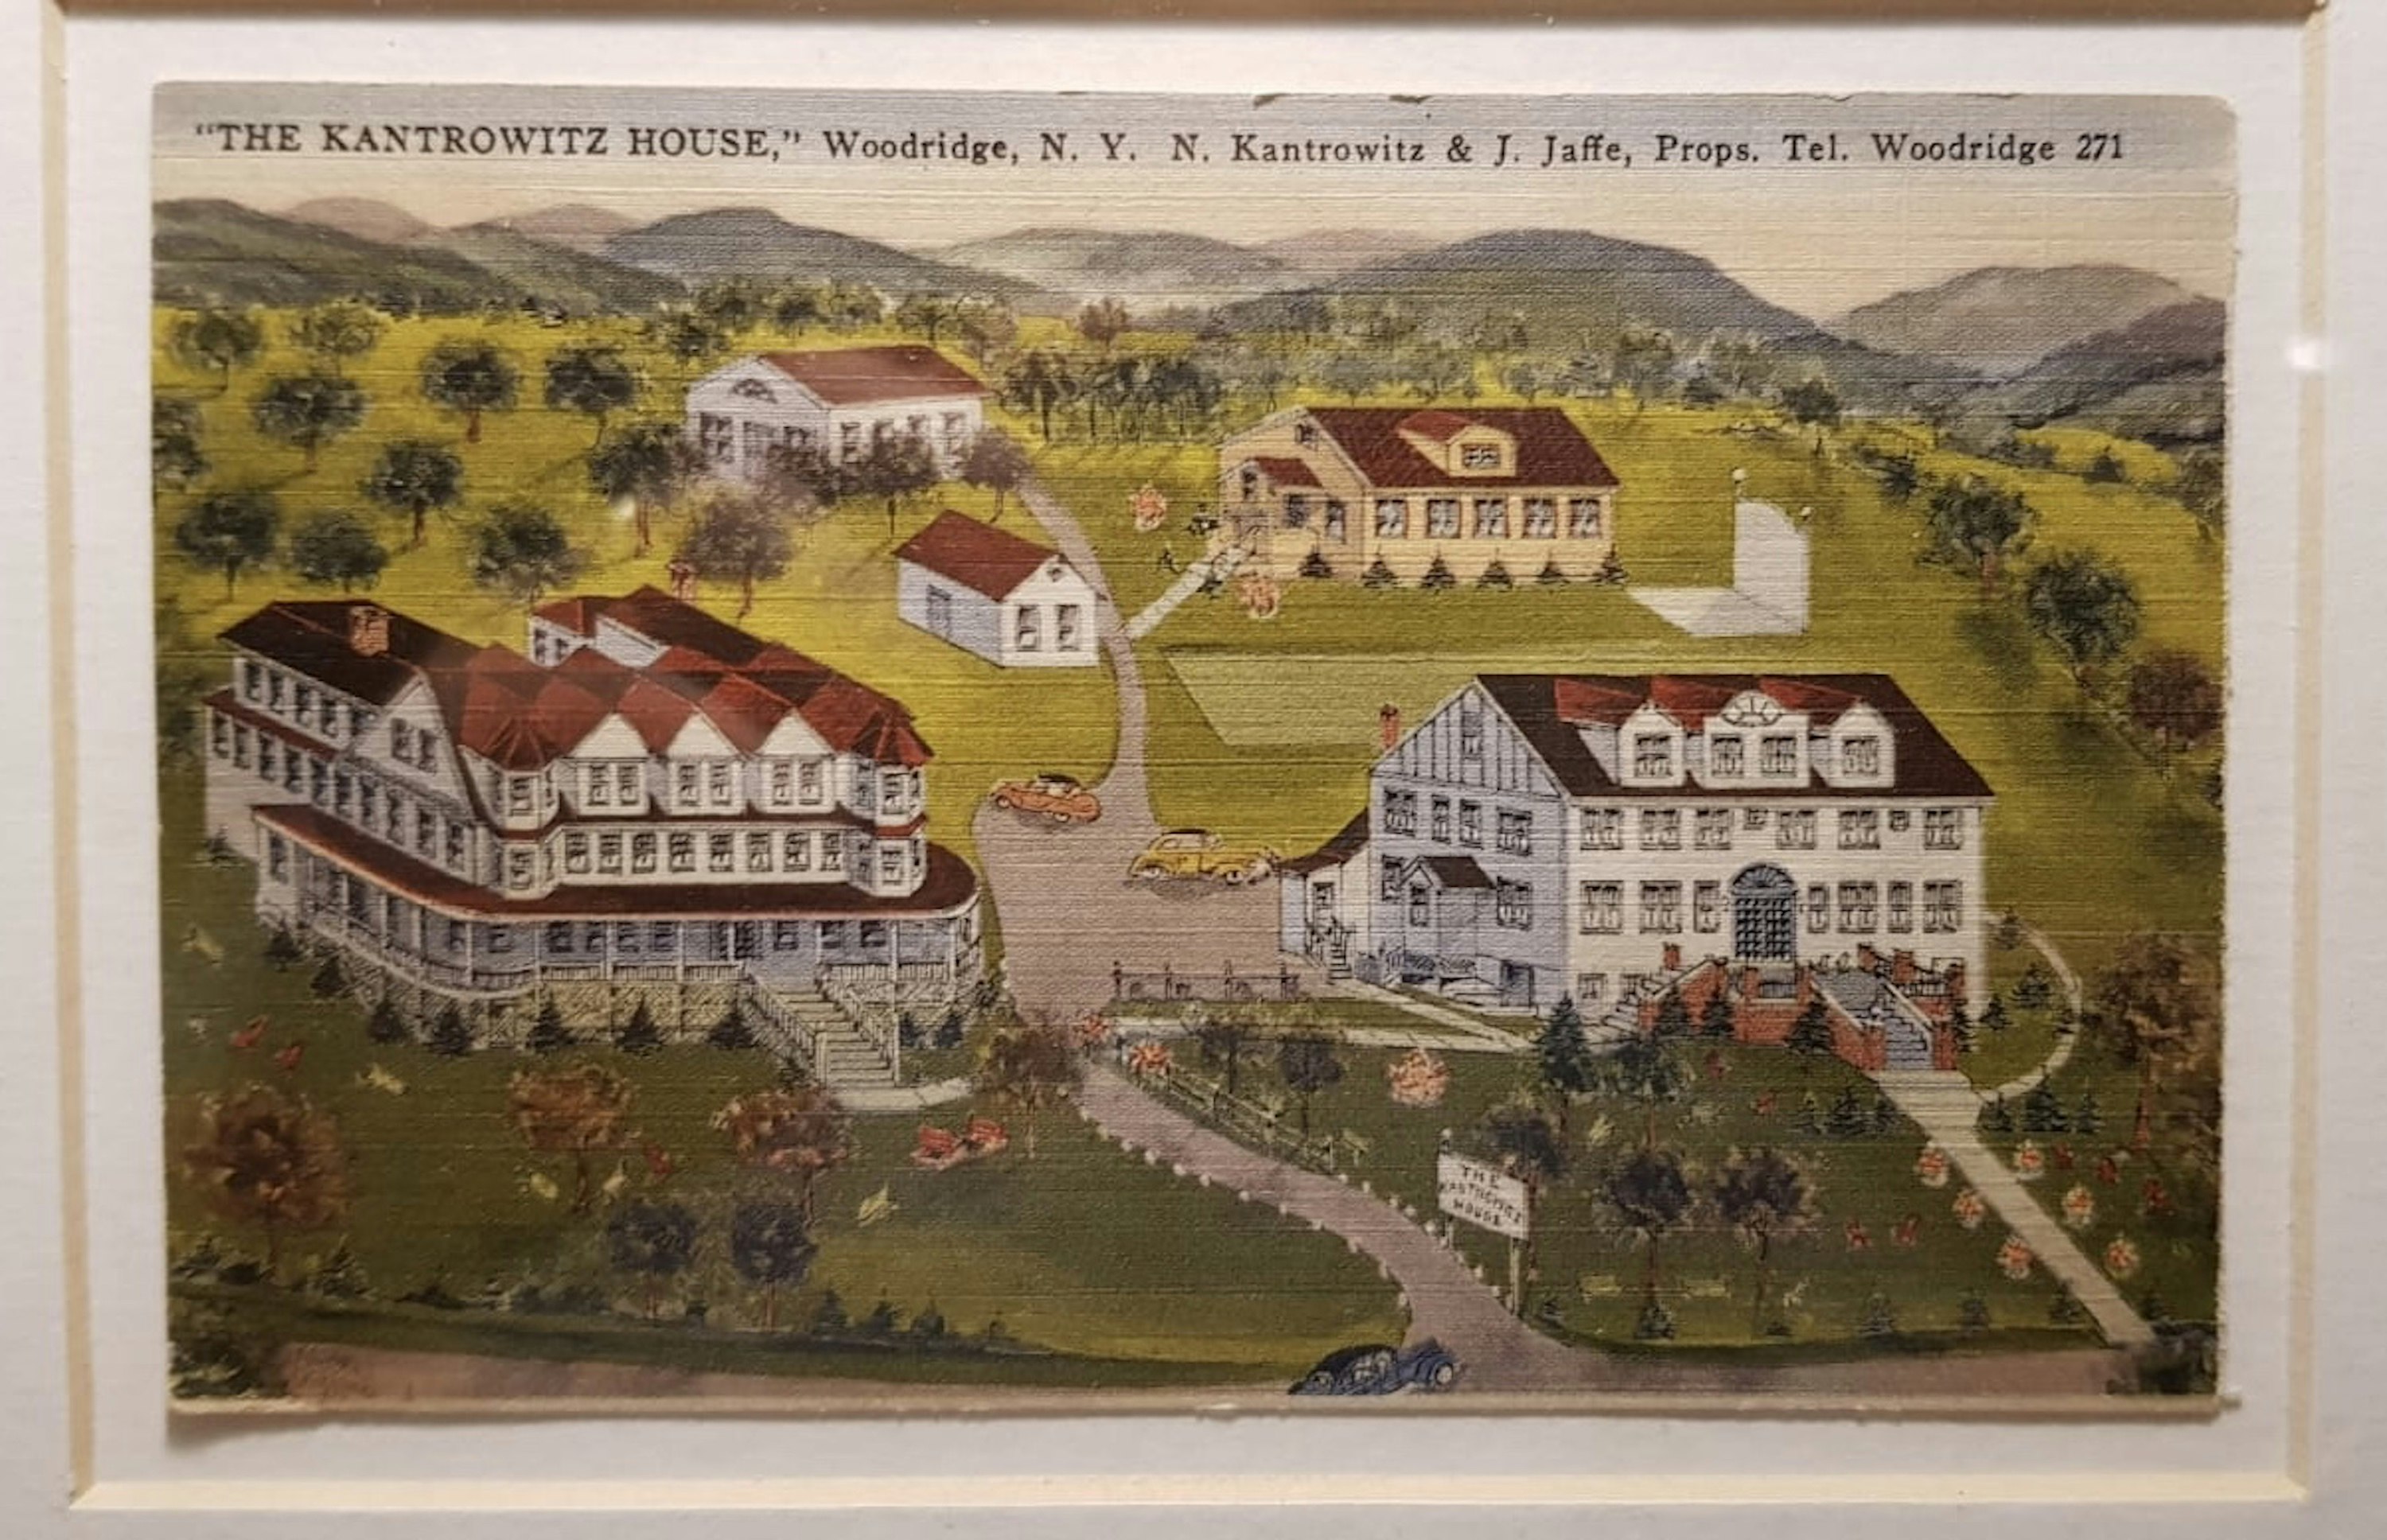 A vintage illustration of the Kantrowitz House resort, depicting five white buildings with red roofs and long driveways set amongst grassy hills with mountains in the background.